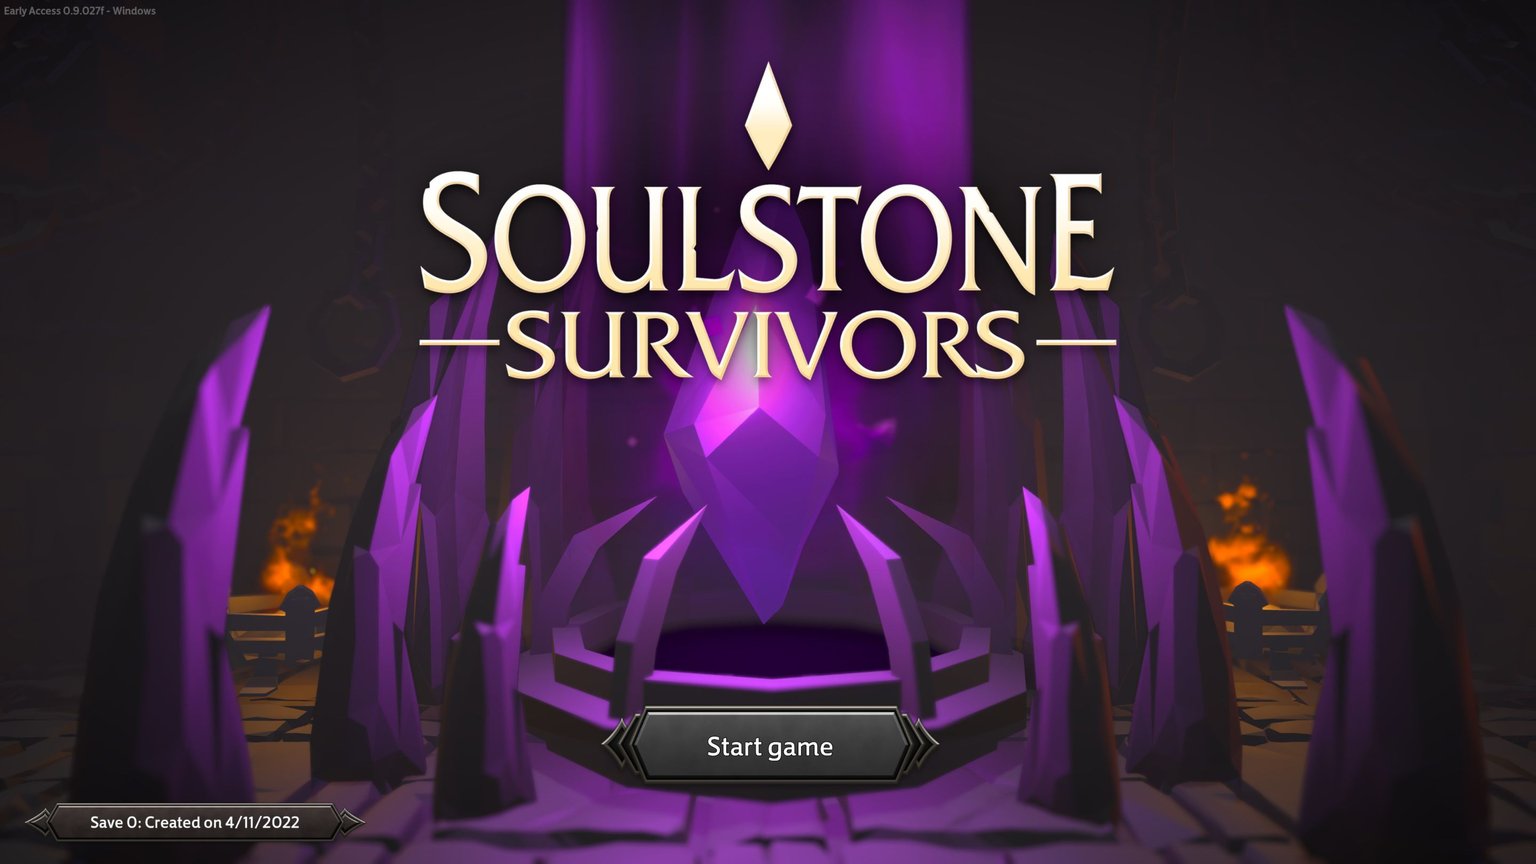 Soulstone Survivors Will Hit Early Access In Early November